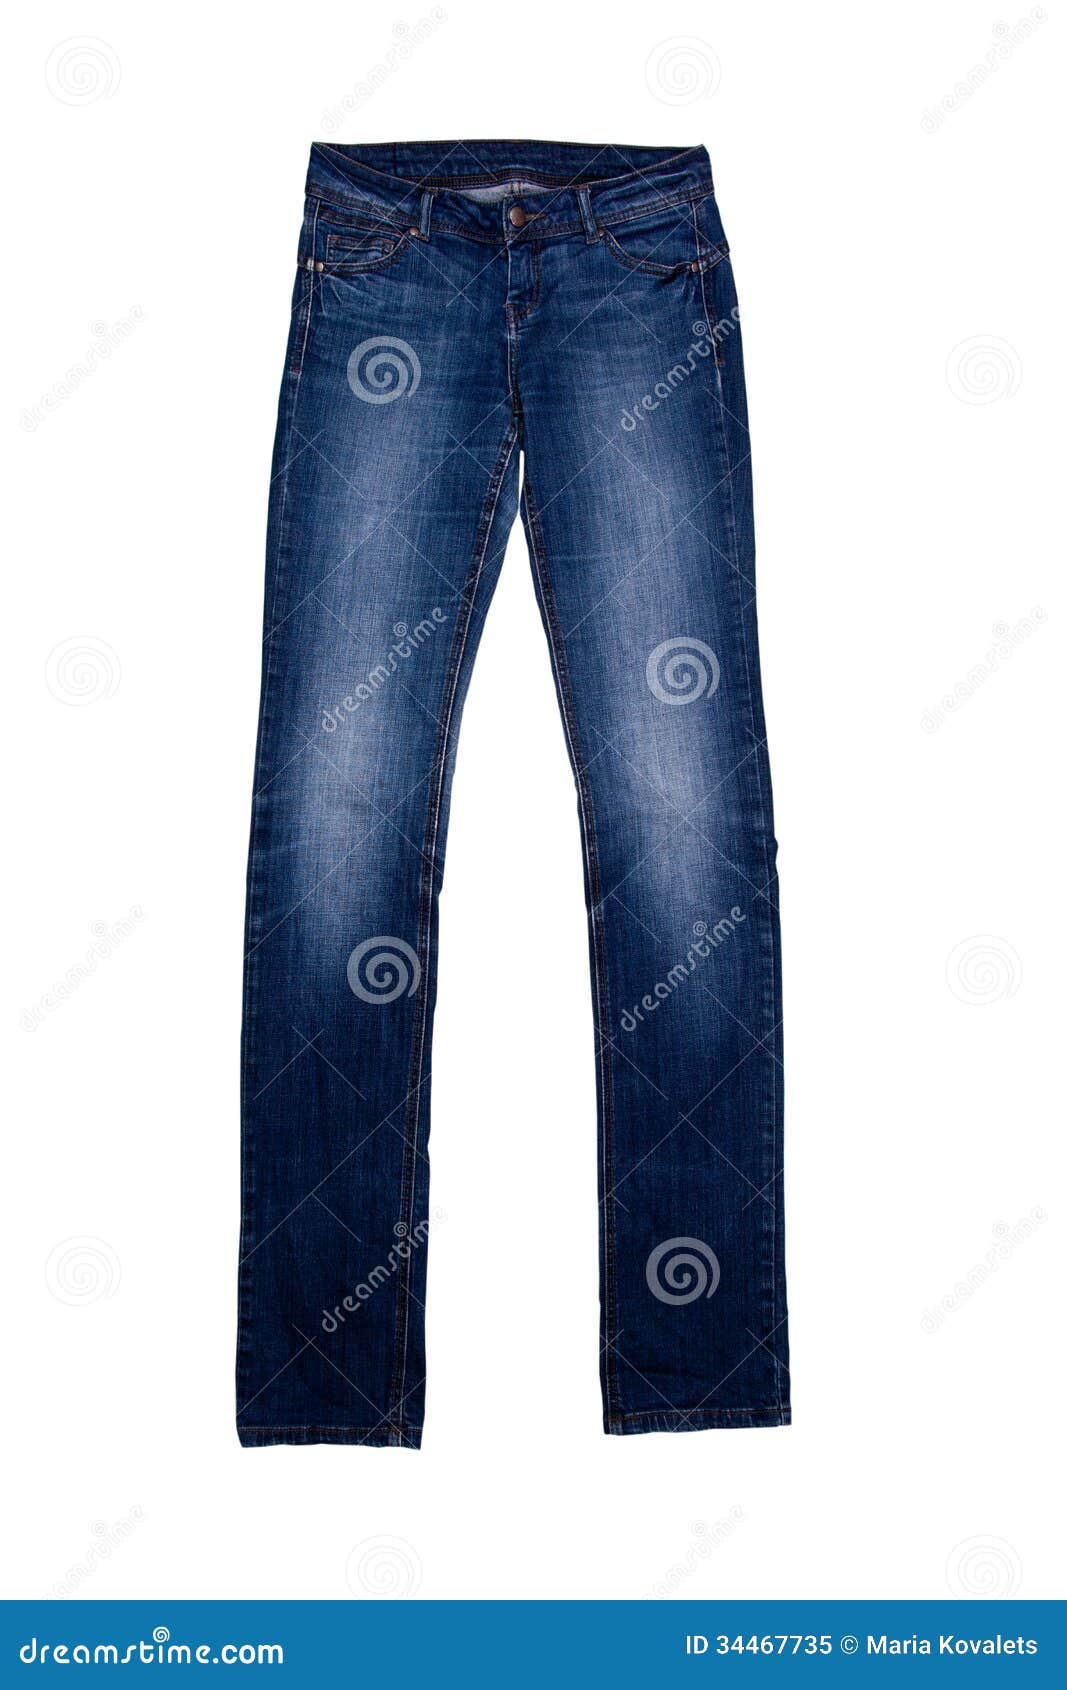 Blue Jeans Royalty Free Stock Photo - Image: 34467735